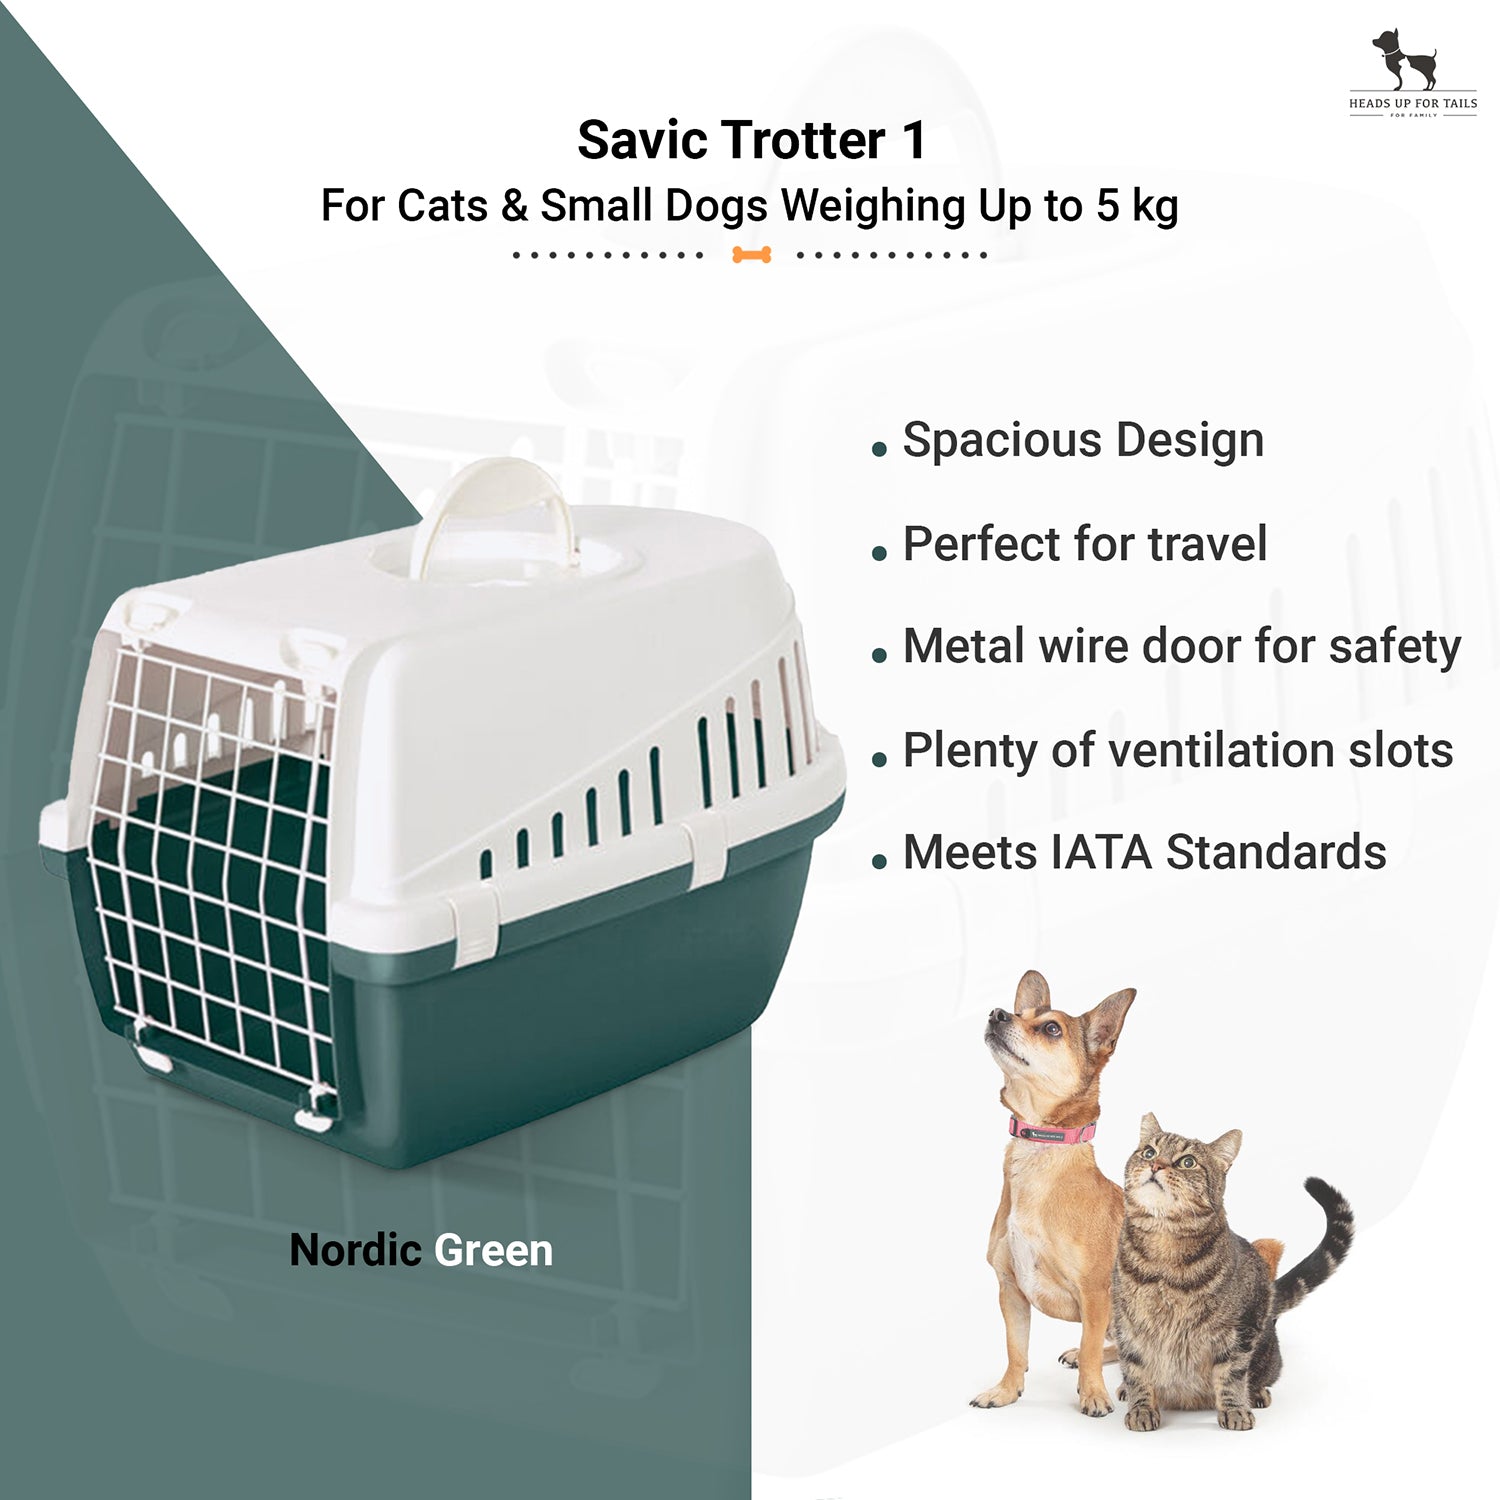 Savic Trotter 1 - Dog & Cat Carrier - Nordic Green - 19  x 13 x 12 inch - Holds up to 5 kg - Heads Up For Tails